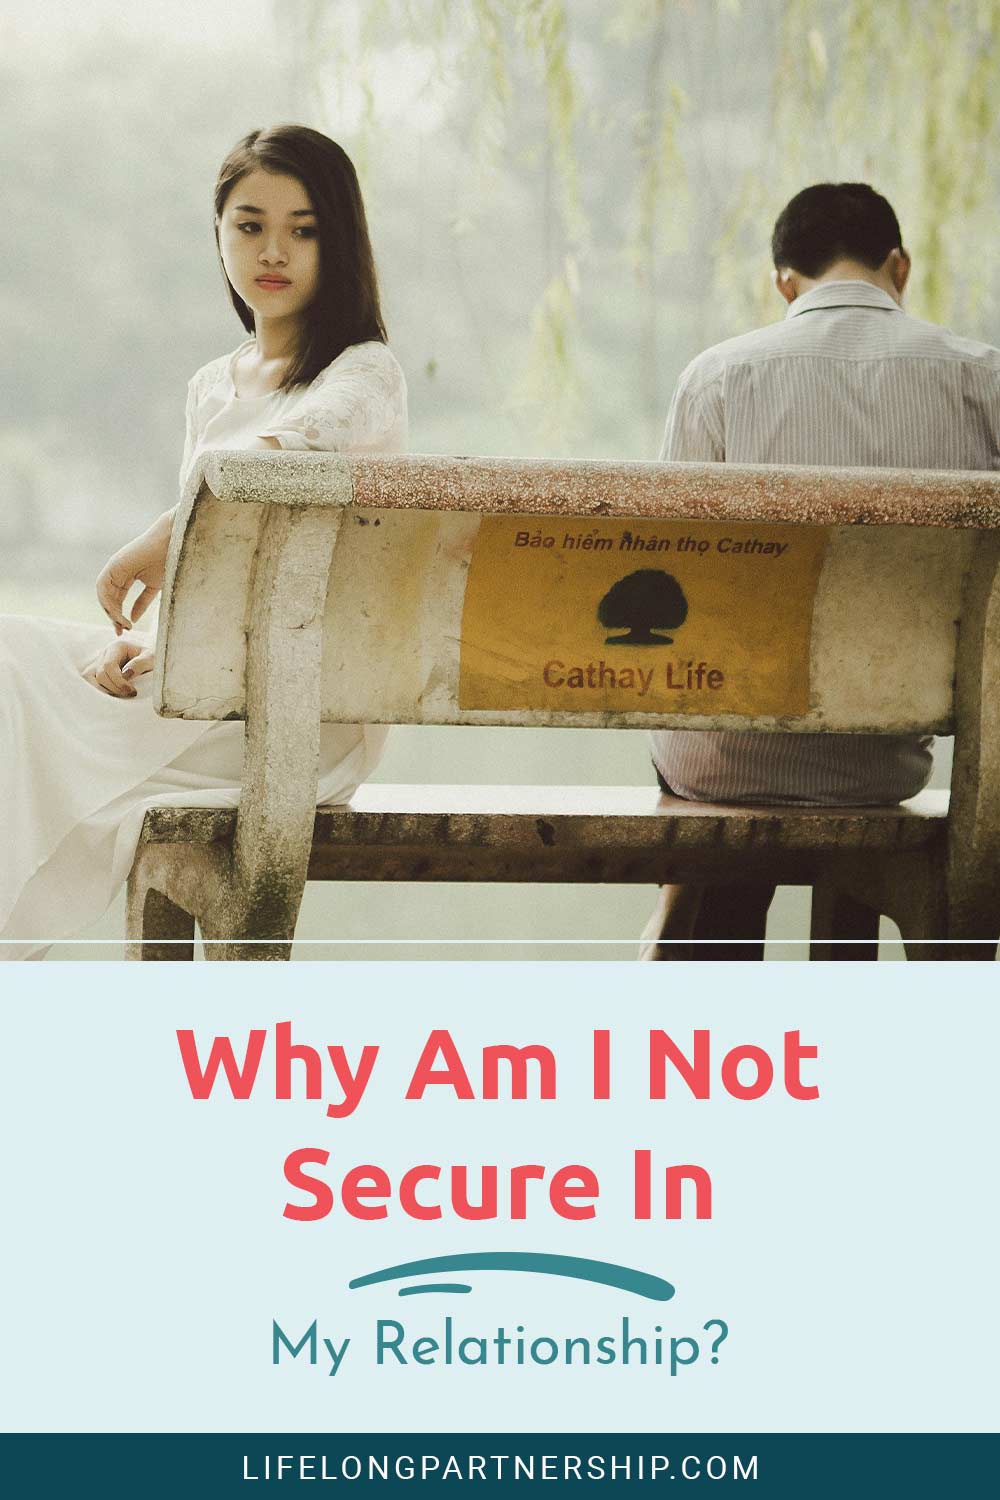 Why Am I Not Secure In My Relationship?